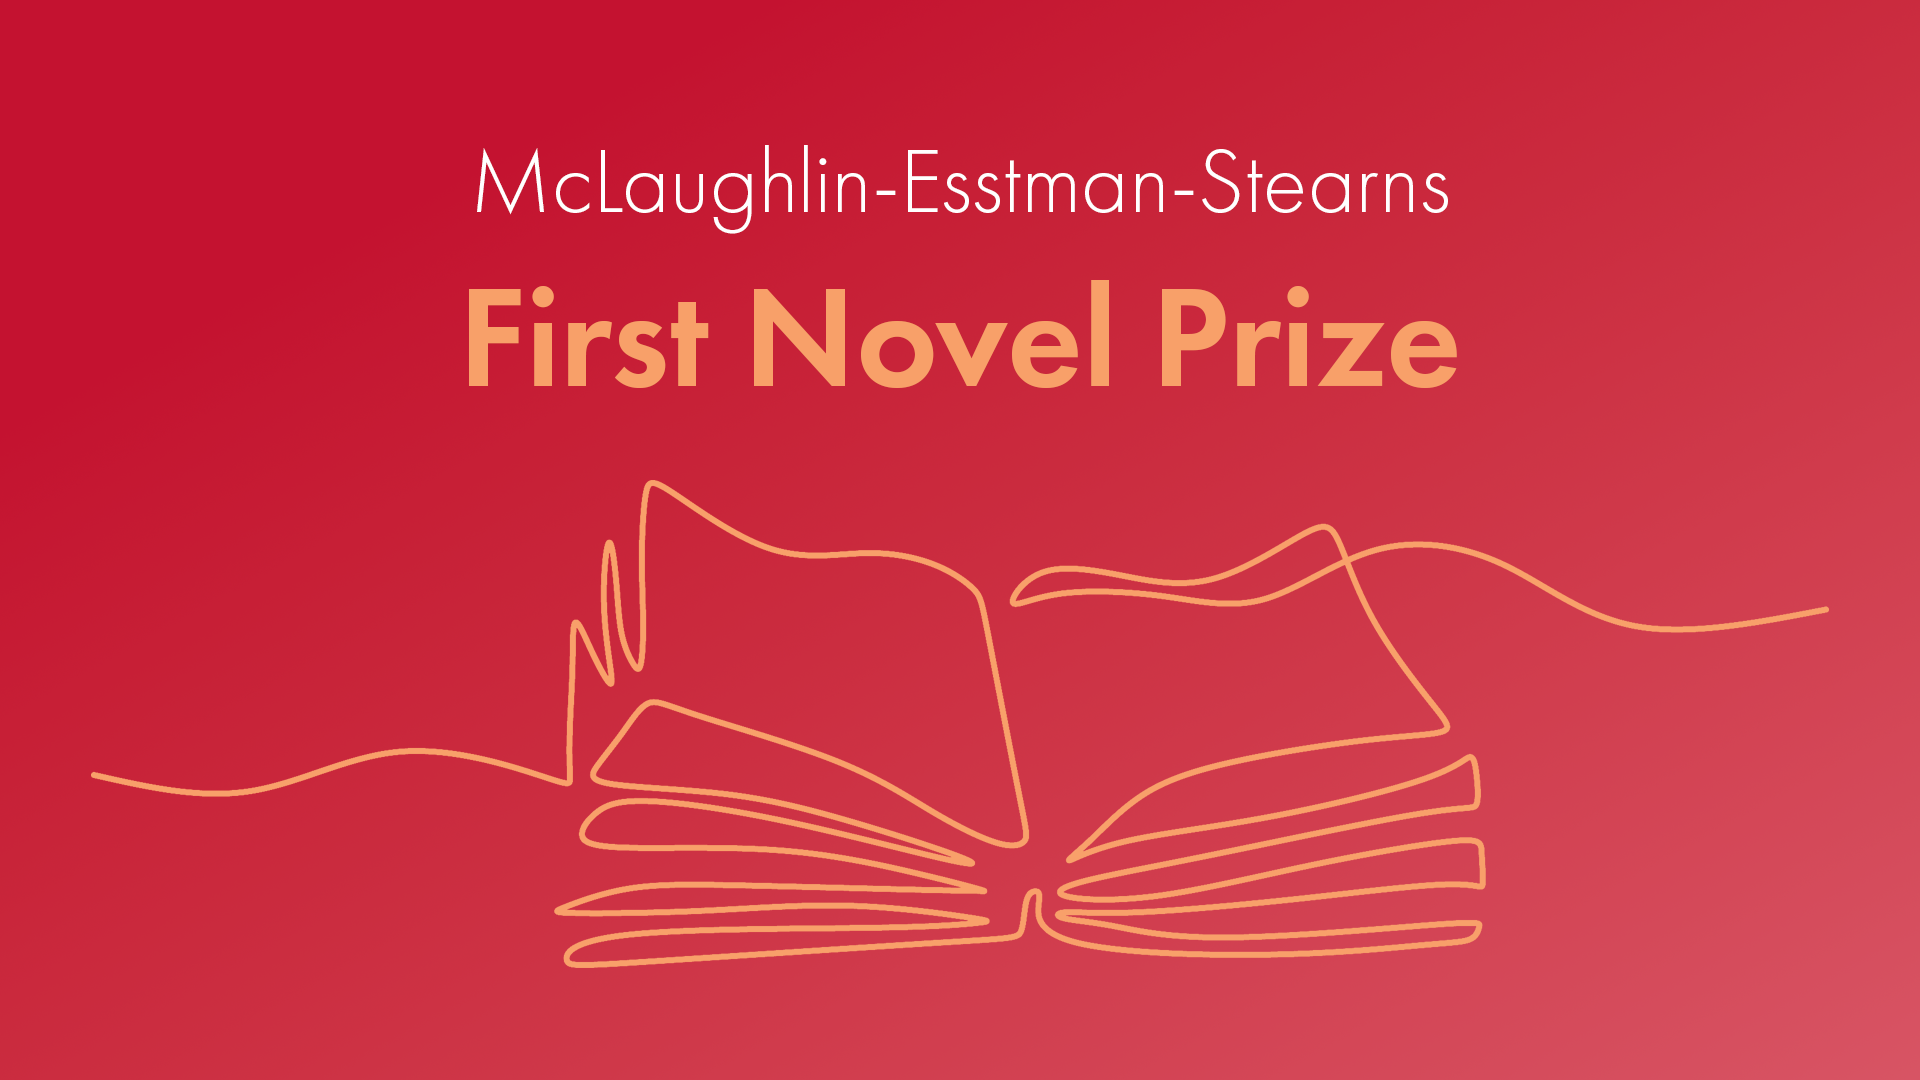 First Novel Prize - The Writer's Center